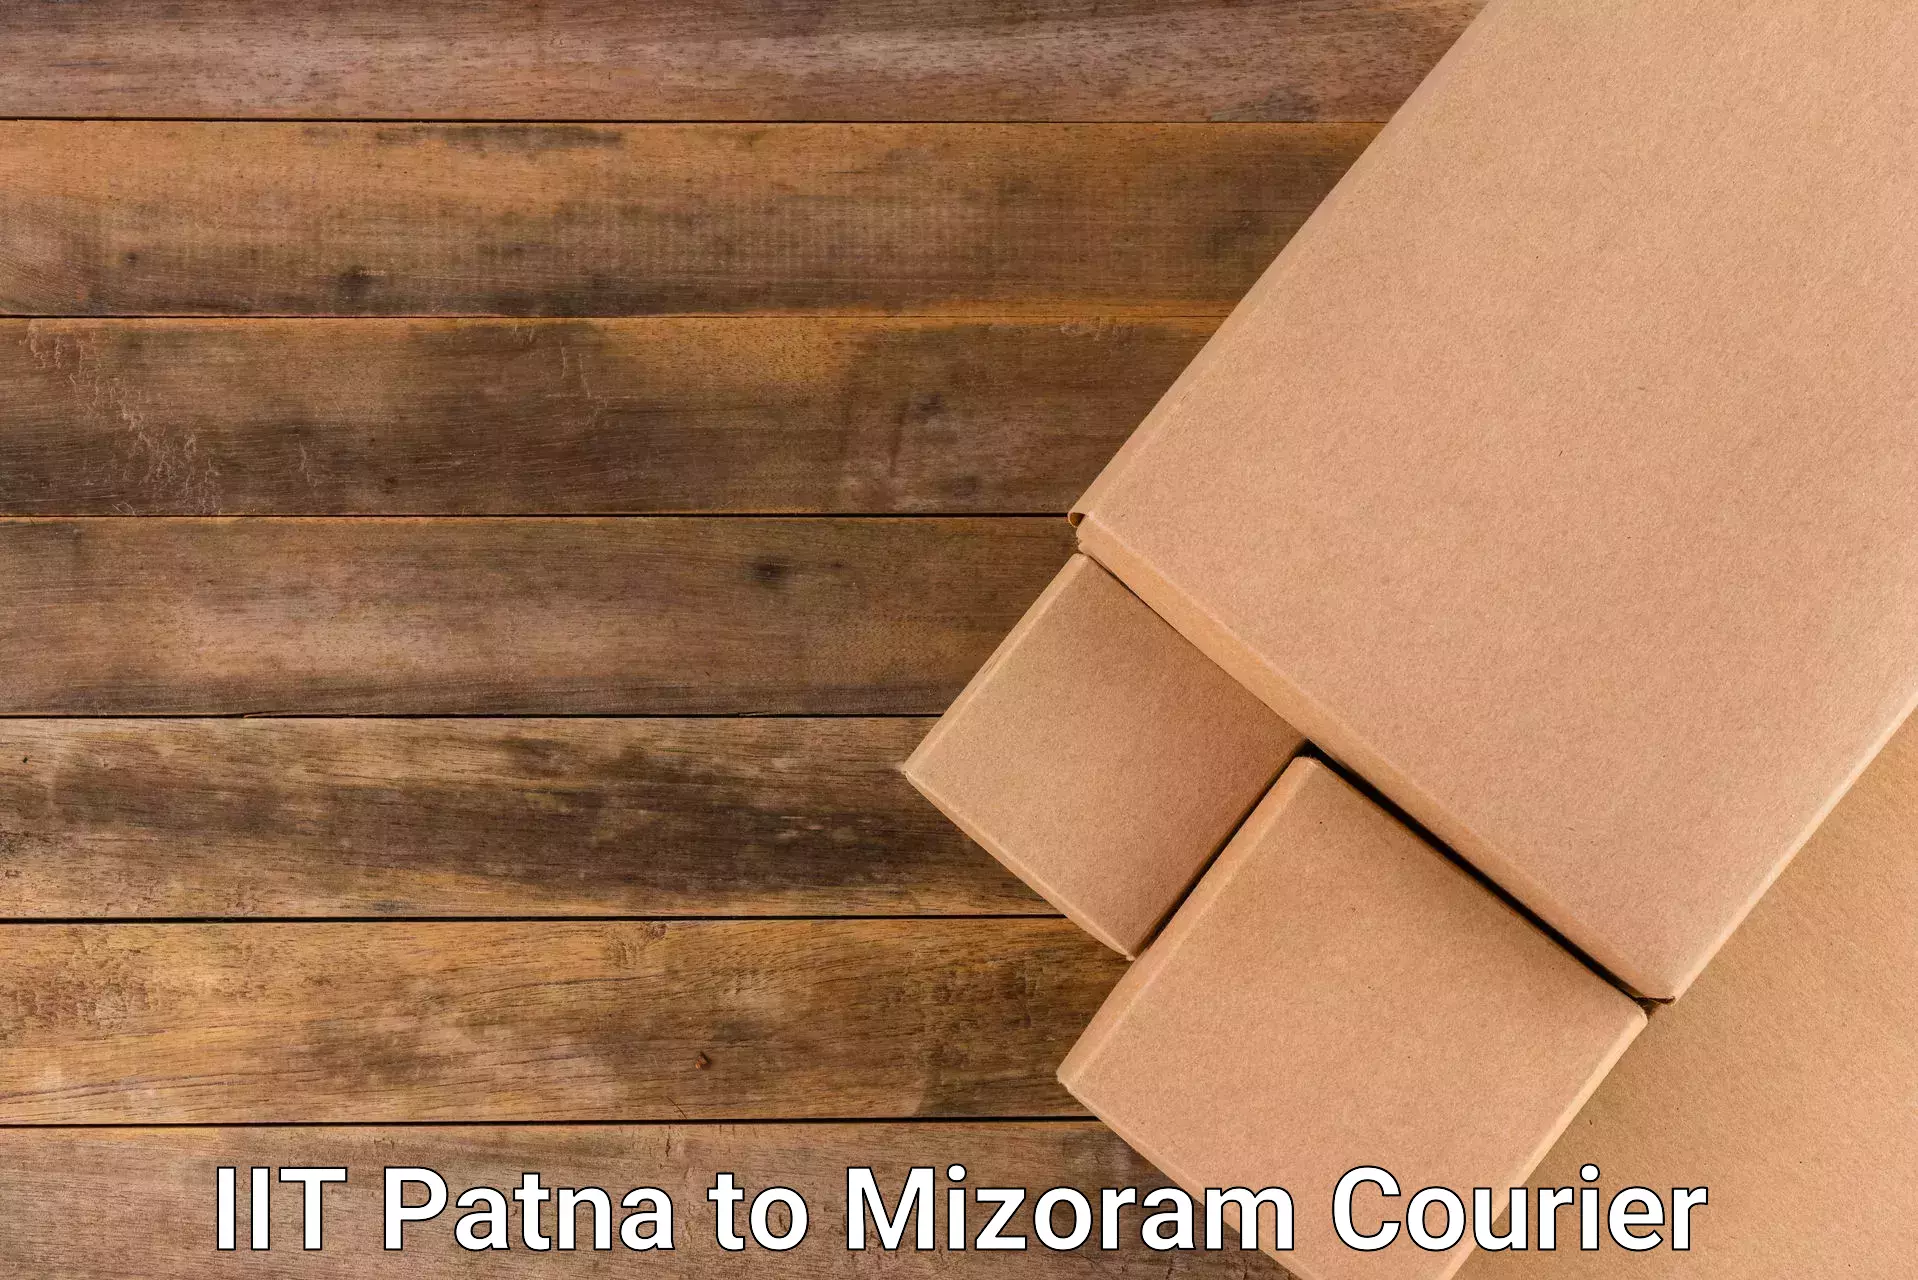 Small parcel delivery in IIT Patna to Mizoram